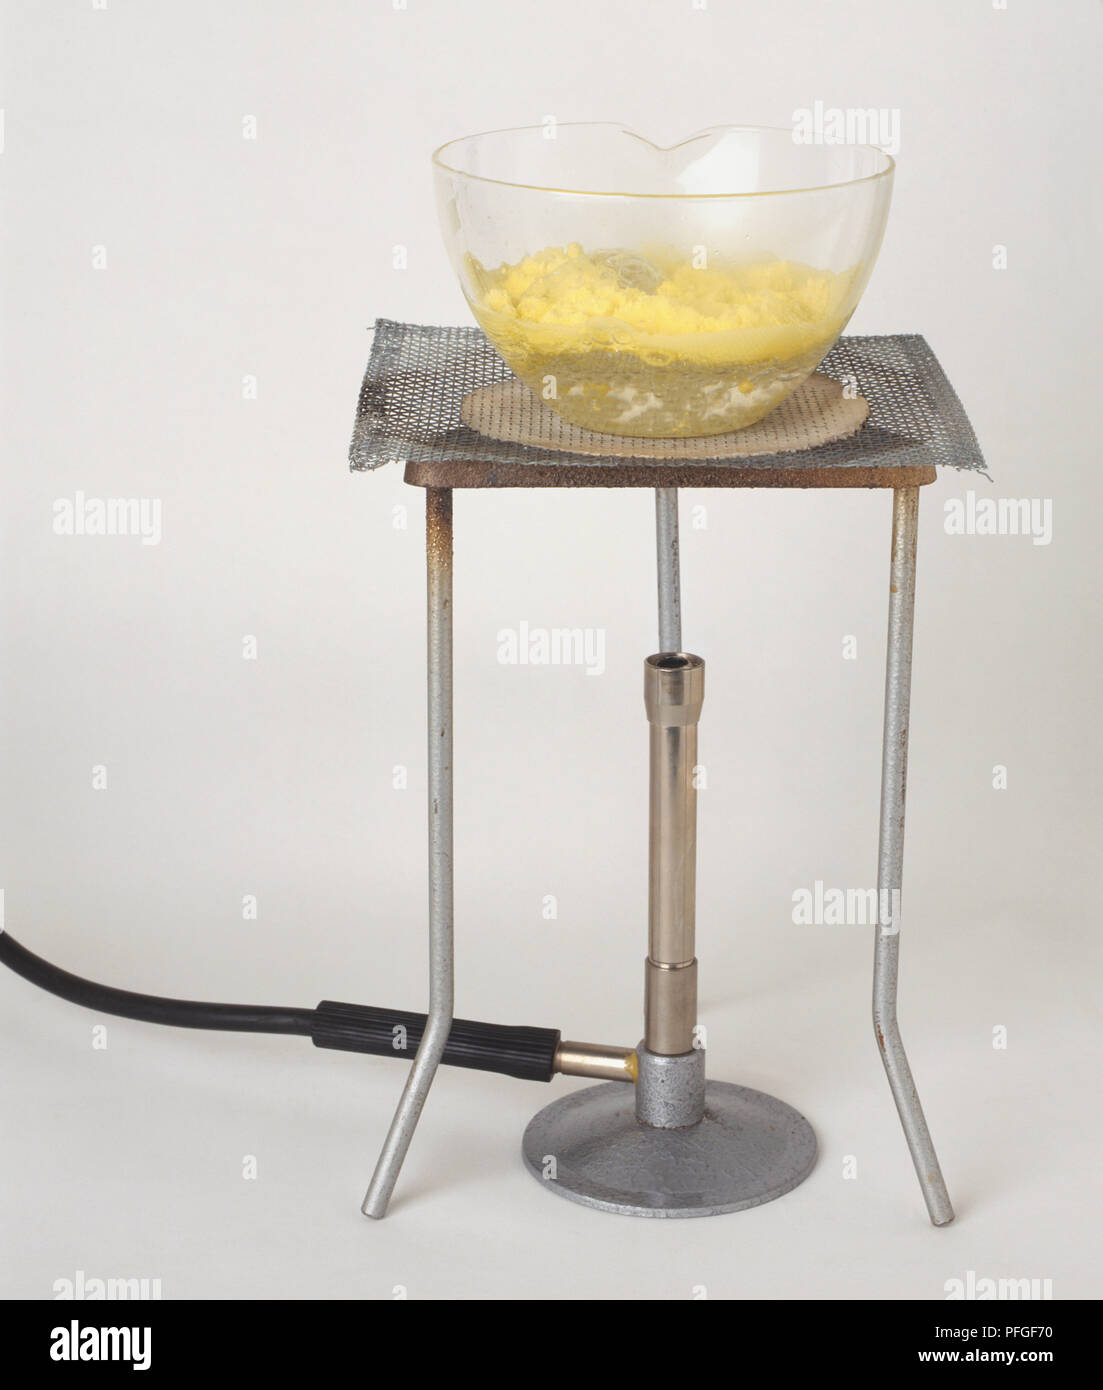 Glass dish with suspension of sulphur in sodium sulphite heated on a tripod. Stock Photo